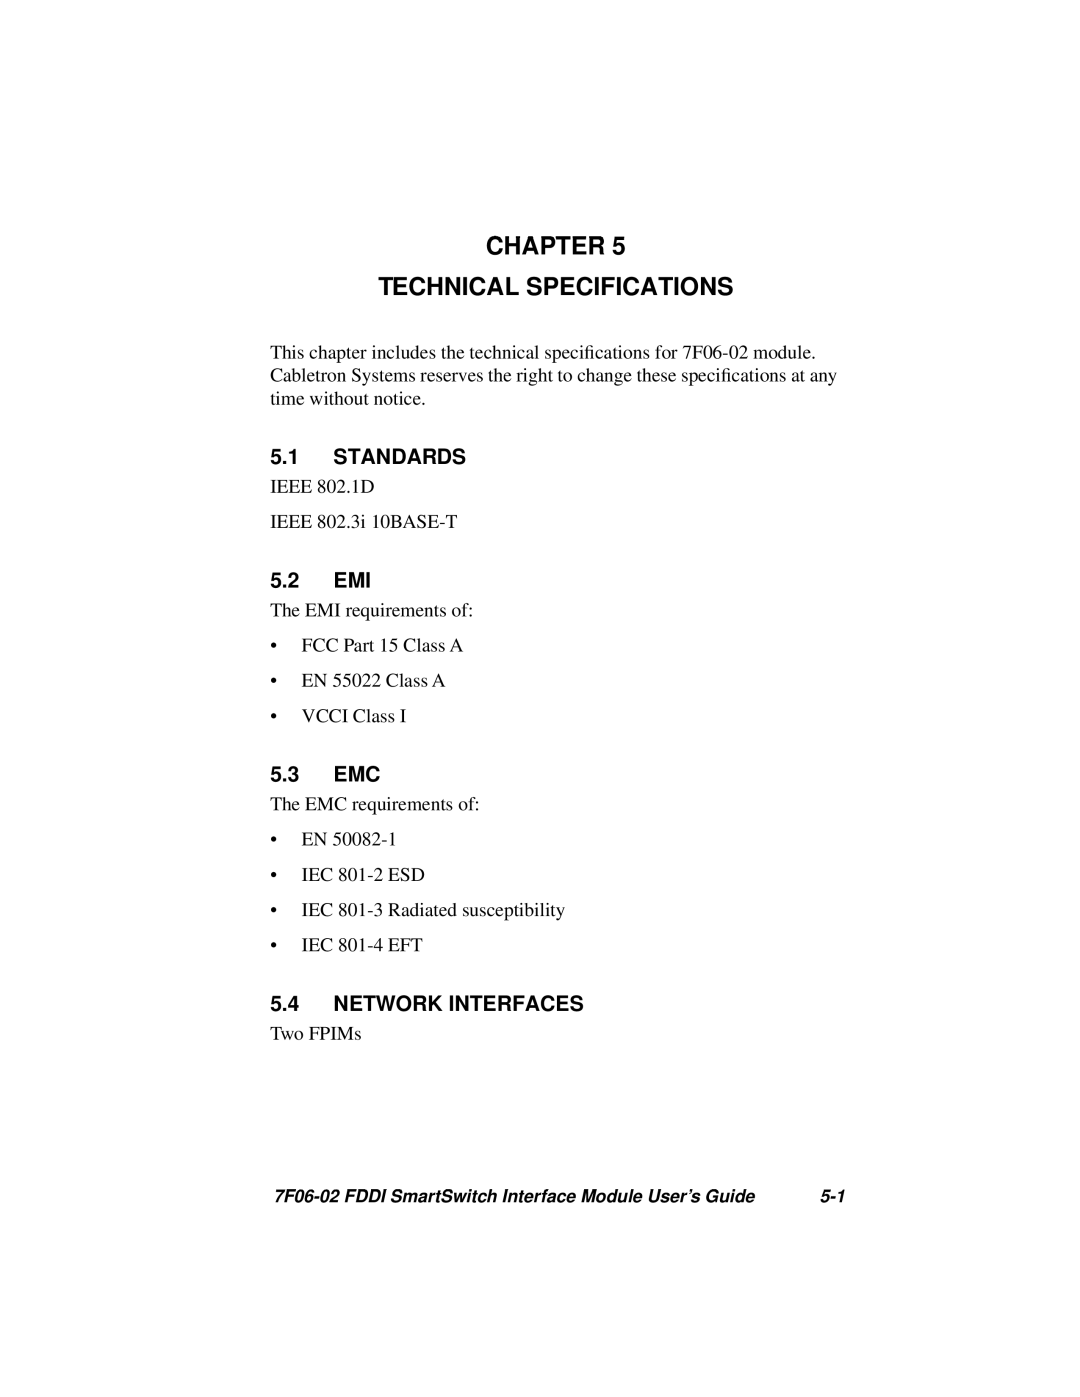 Cabletron Systems FDDI manual Chapter Technical Specifications, Standards, 5.2 EMI, 5.3 EMC, Network Interfaces 